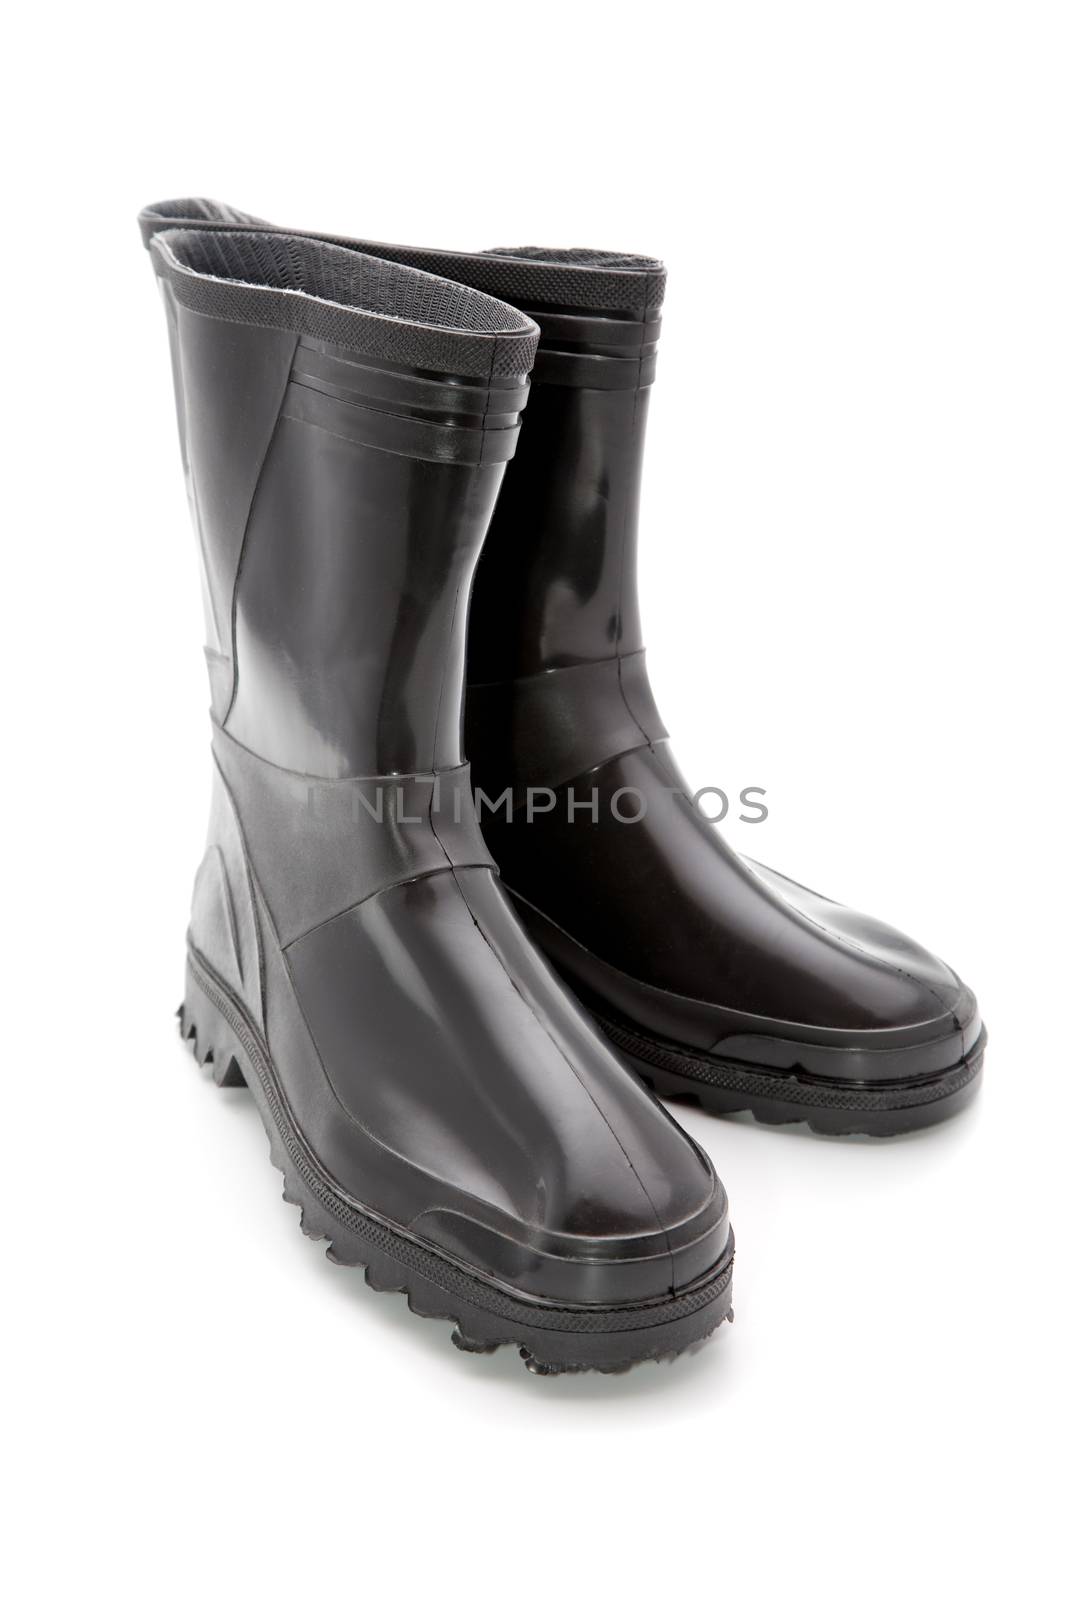 Black man's rubber boots on a white background